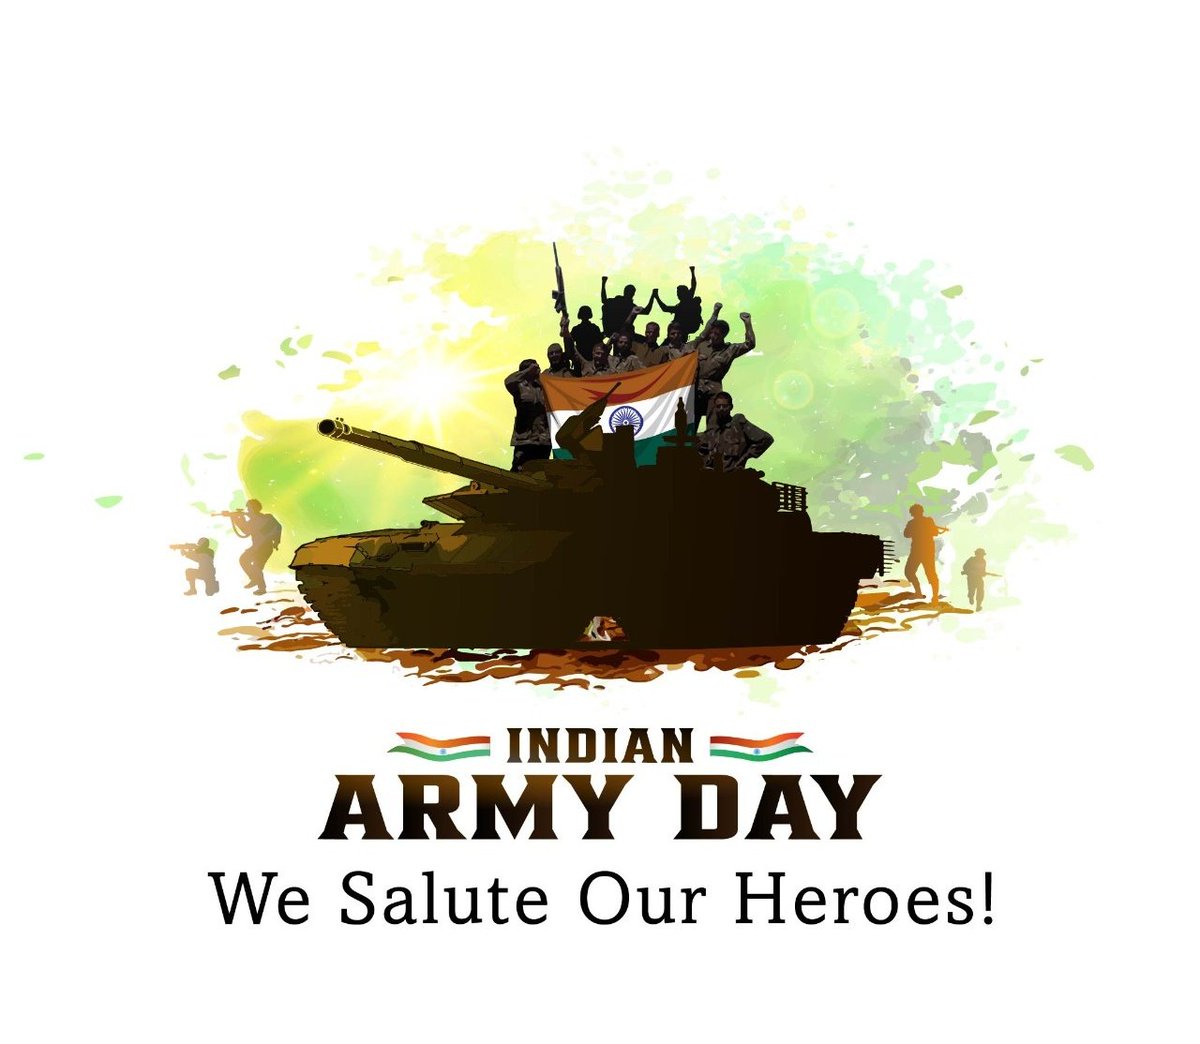 My Greetings to all men & women serving, Veterans and their Families on the #ArmyDay 
Thank you for your selfless service and unwavering commitment to #ServingOurNation

#IndianArmy #ArmyDay2023
#JaiHind